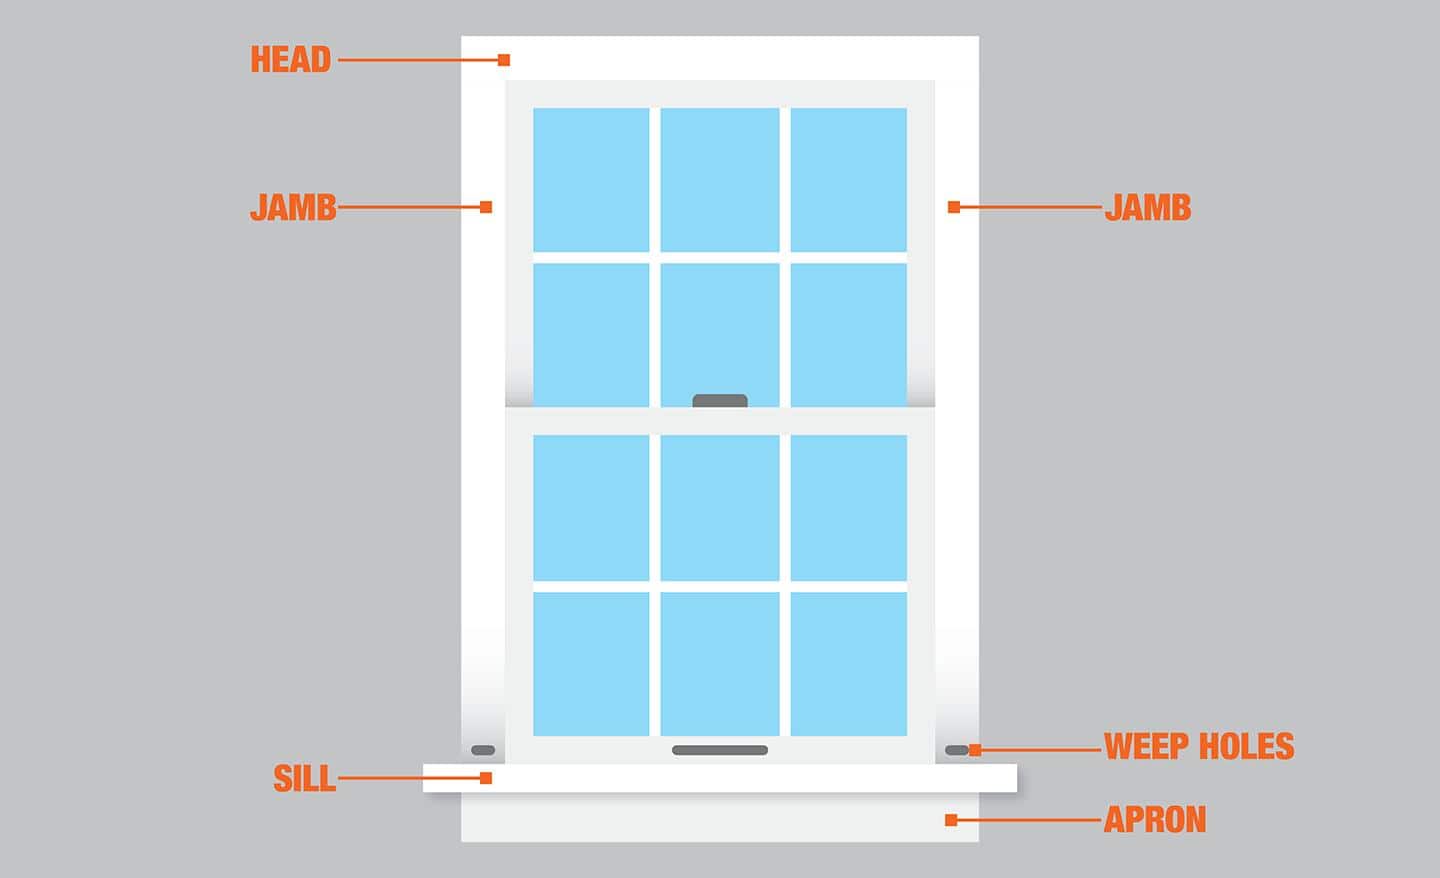 A diagram of a window labels the head, jambs, sill, weep holes and apron. 